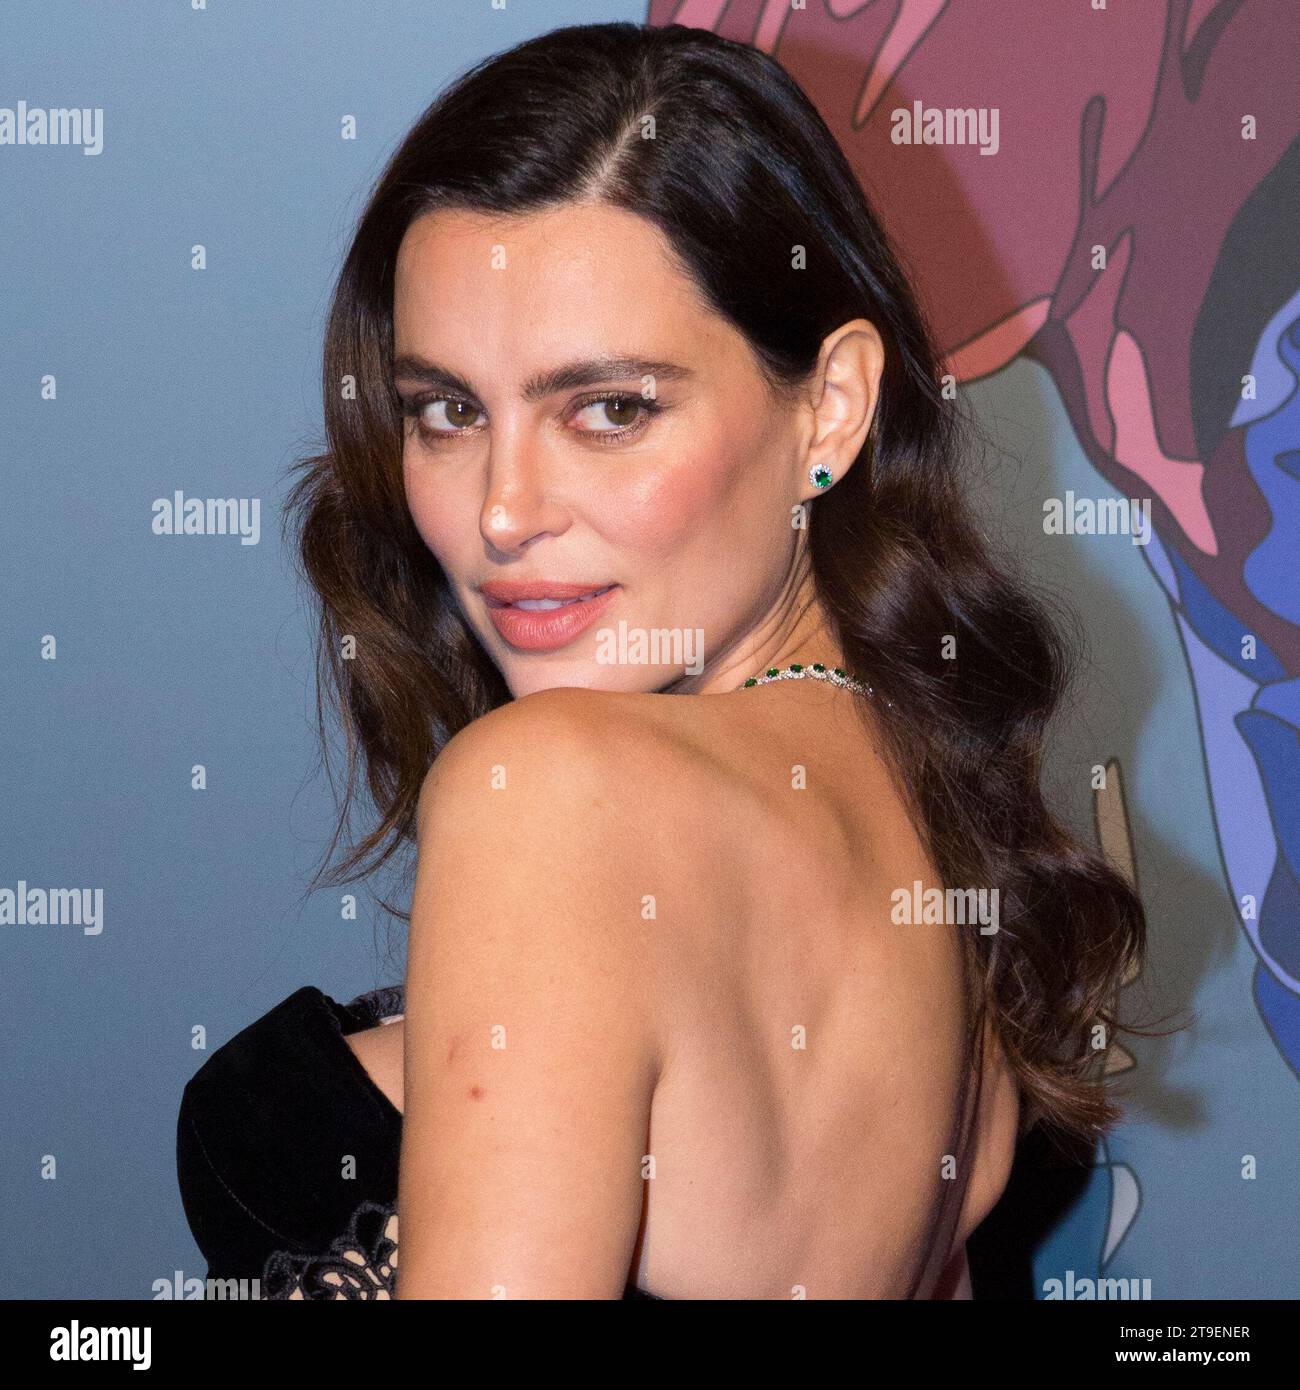 Torino, Italy. 24th Nov, 2023. Model and actress Catrinel Marlon on red carpet of 41st Torino Film Festival opening ceremony Credit: Marco Destefanis/Alamy Live News Stock Photo